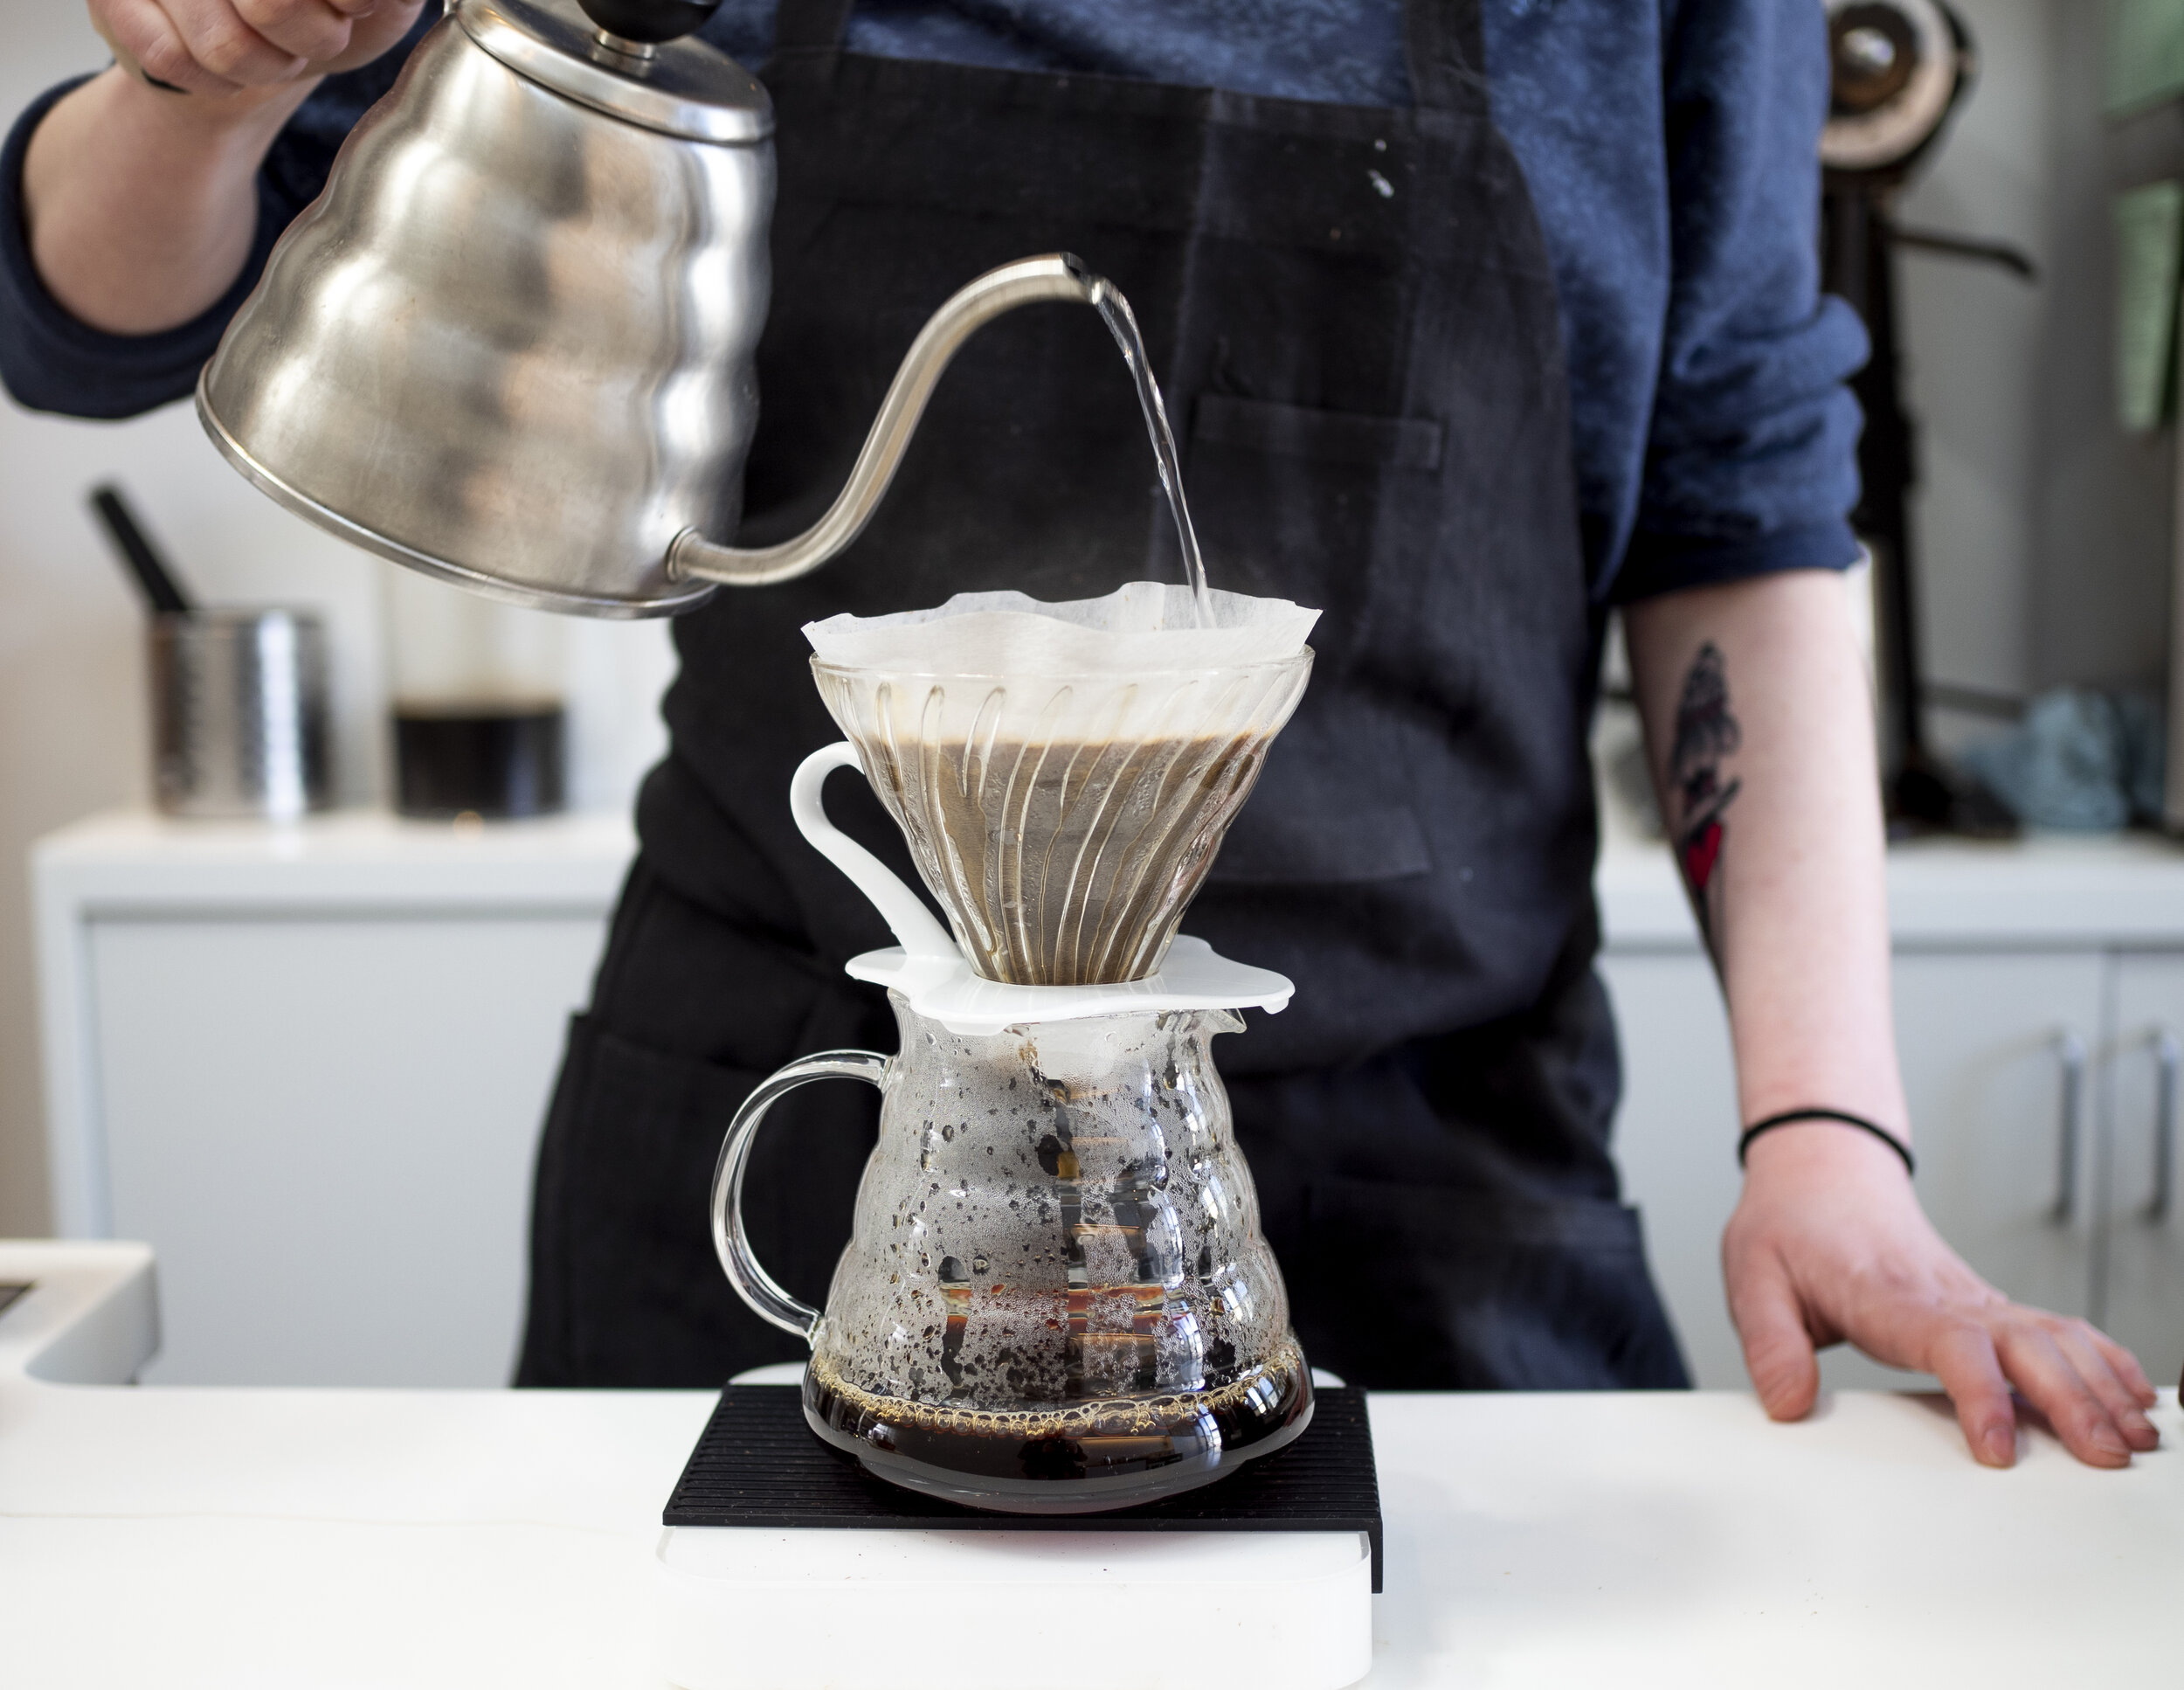 Chemex Ottomatic - having some trouble with this. There's lots of